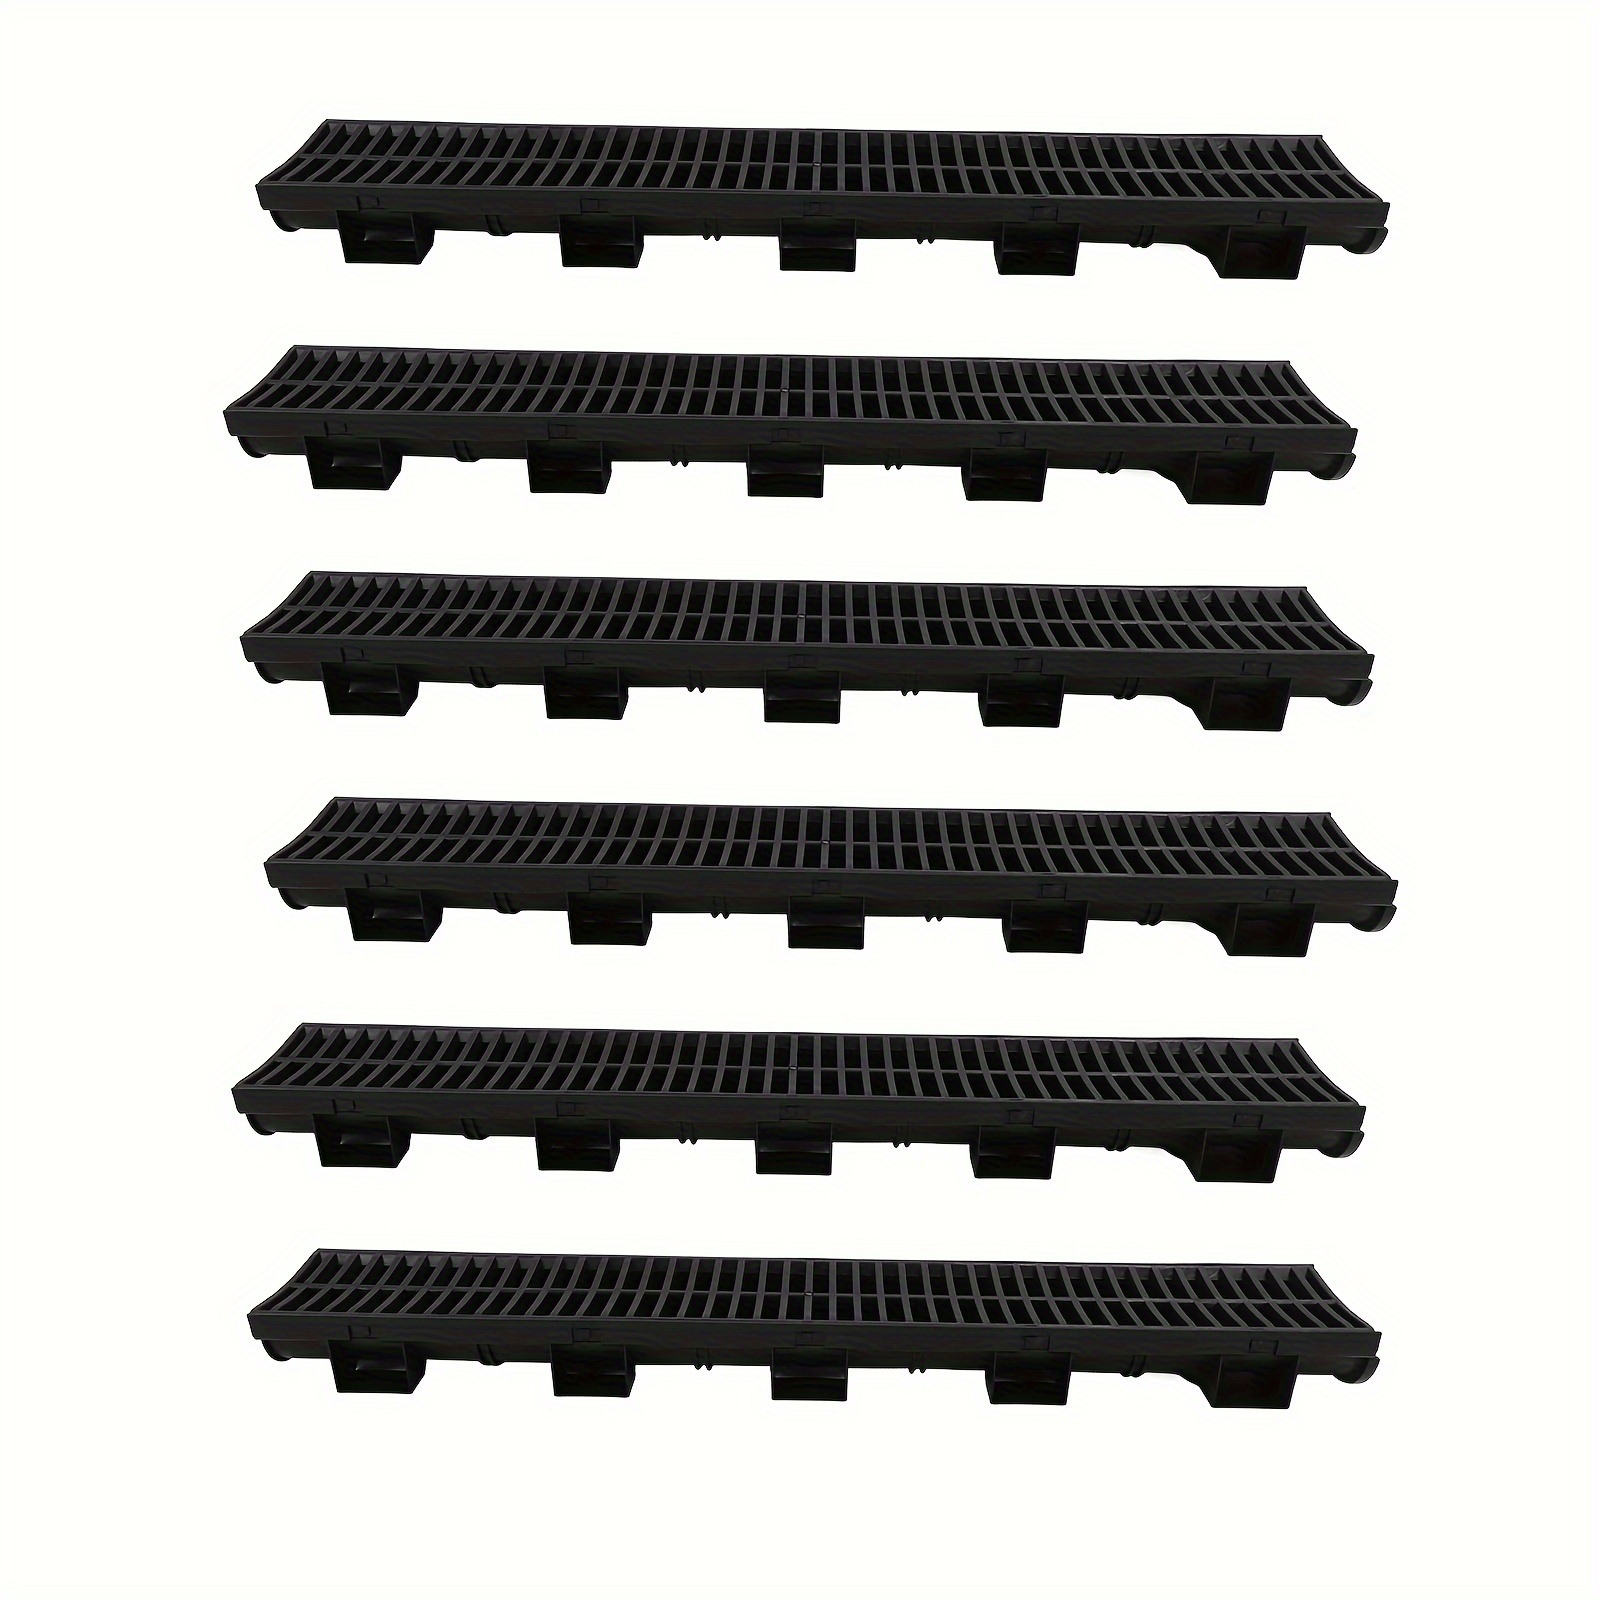 

6 Sets Trench Drain System Interlocking Leakage Proof Channel Drain With Grates 5.7x3.1-inch Hdpe Drainage Trench, Black Plastic Garage Floor Drain For Gardens Farms Terrace, Yard Fence